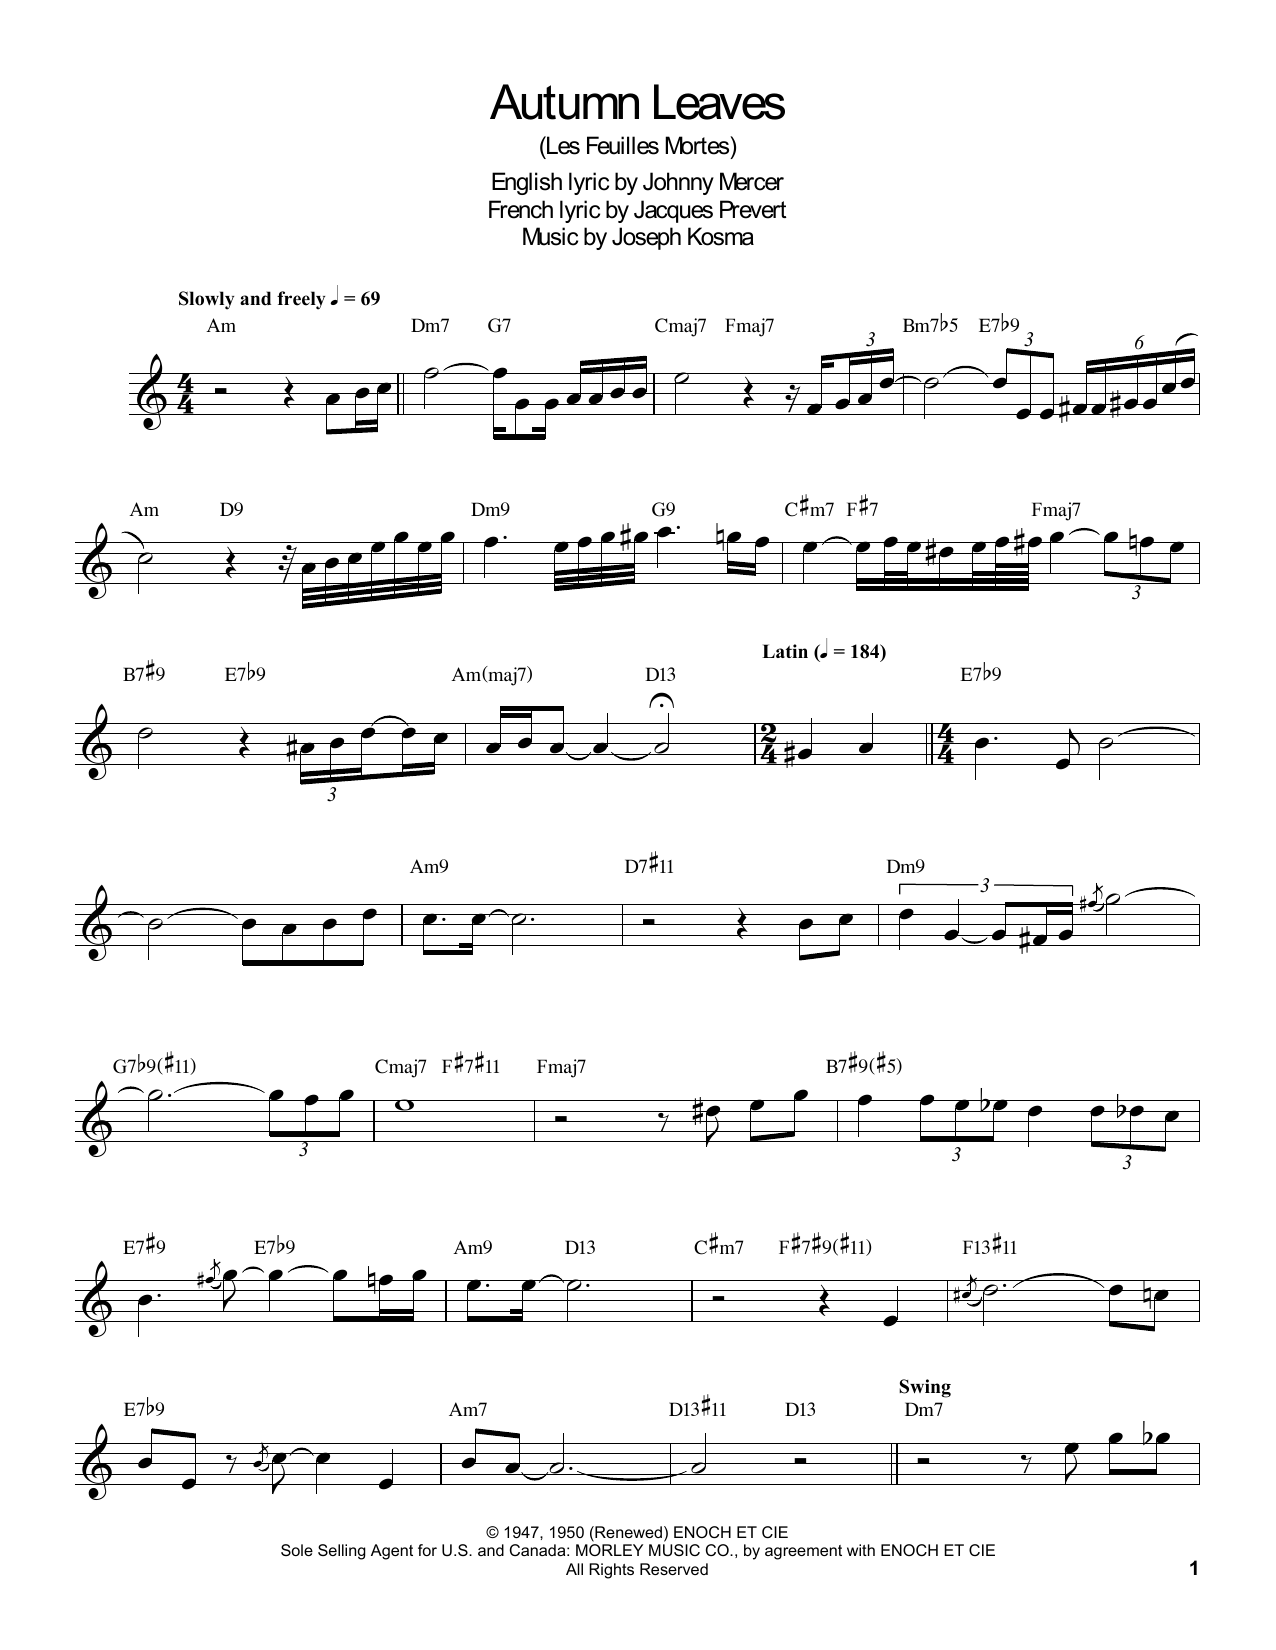 Buddy DeFranco Autumn Leaves sheet music notes and chords. Download Printable PDF.